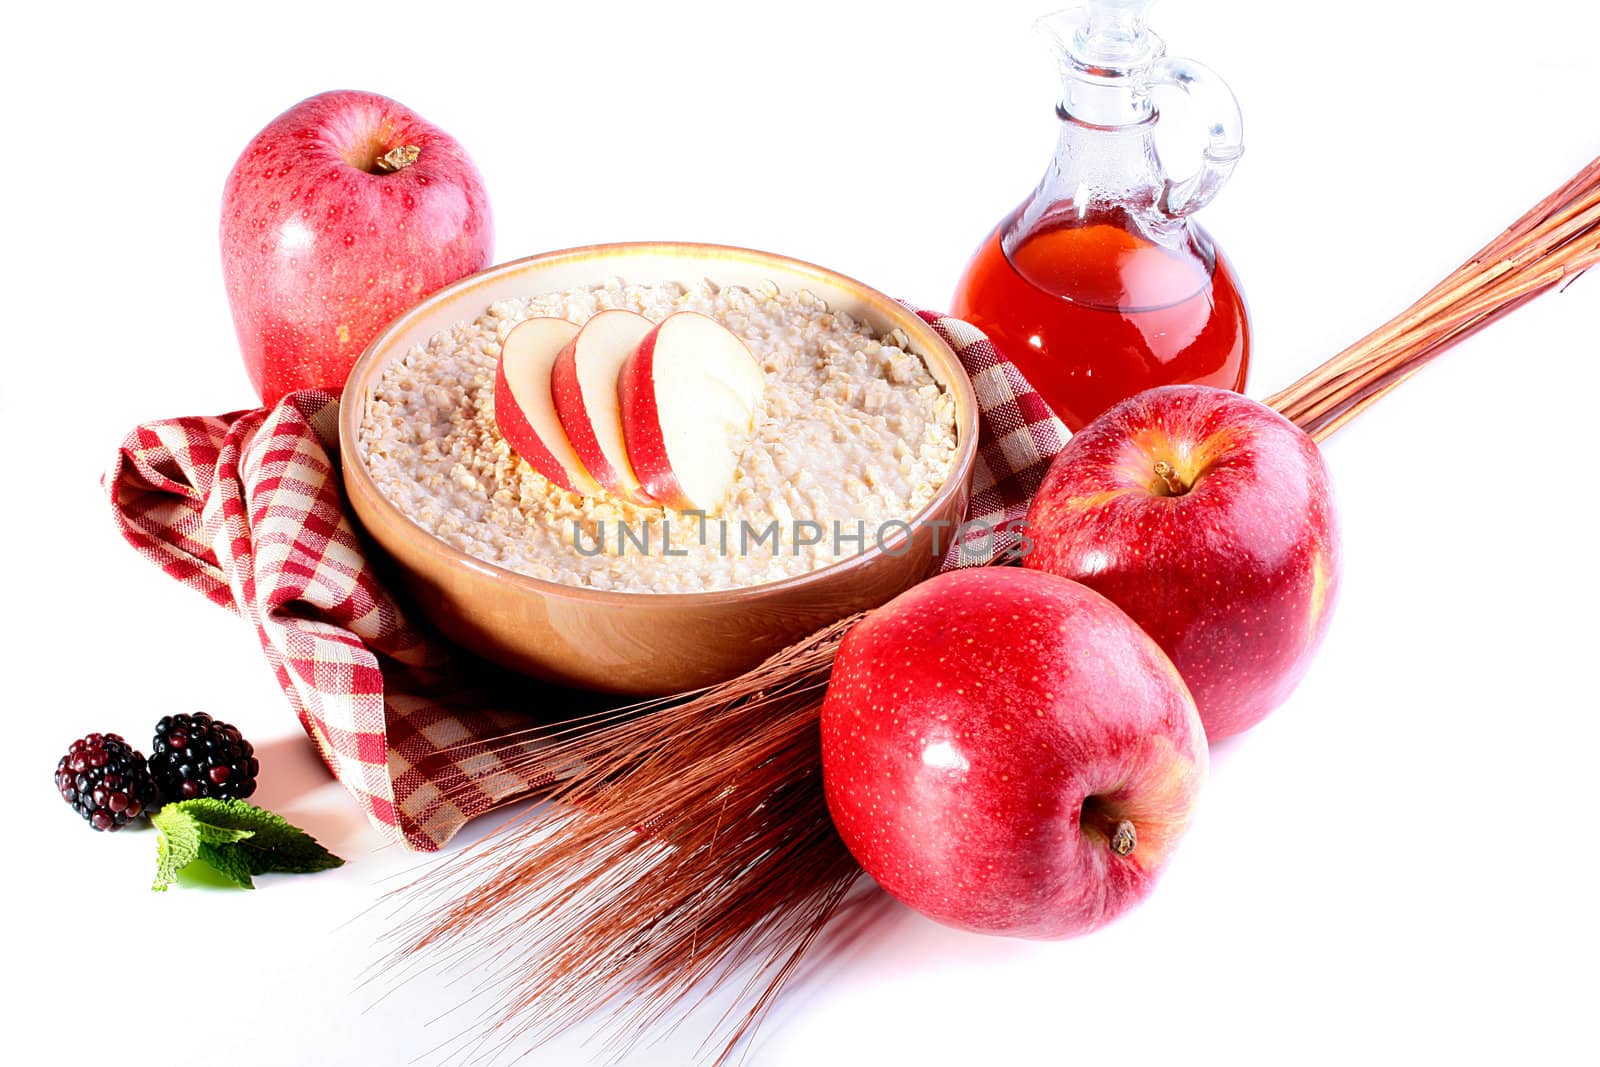 Porridge with apples, ears and berries, on a background a bottle with oil and a towel.